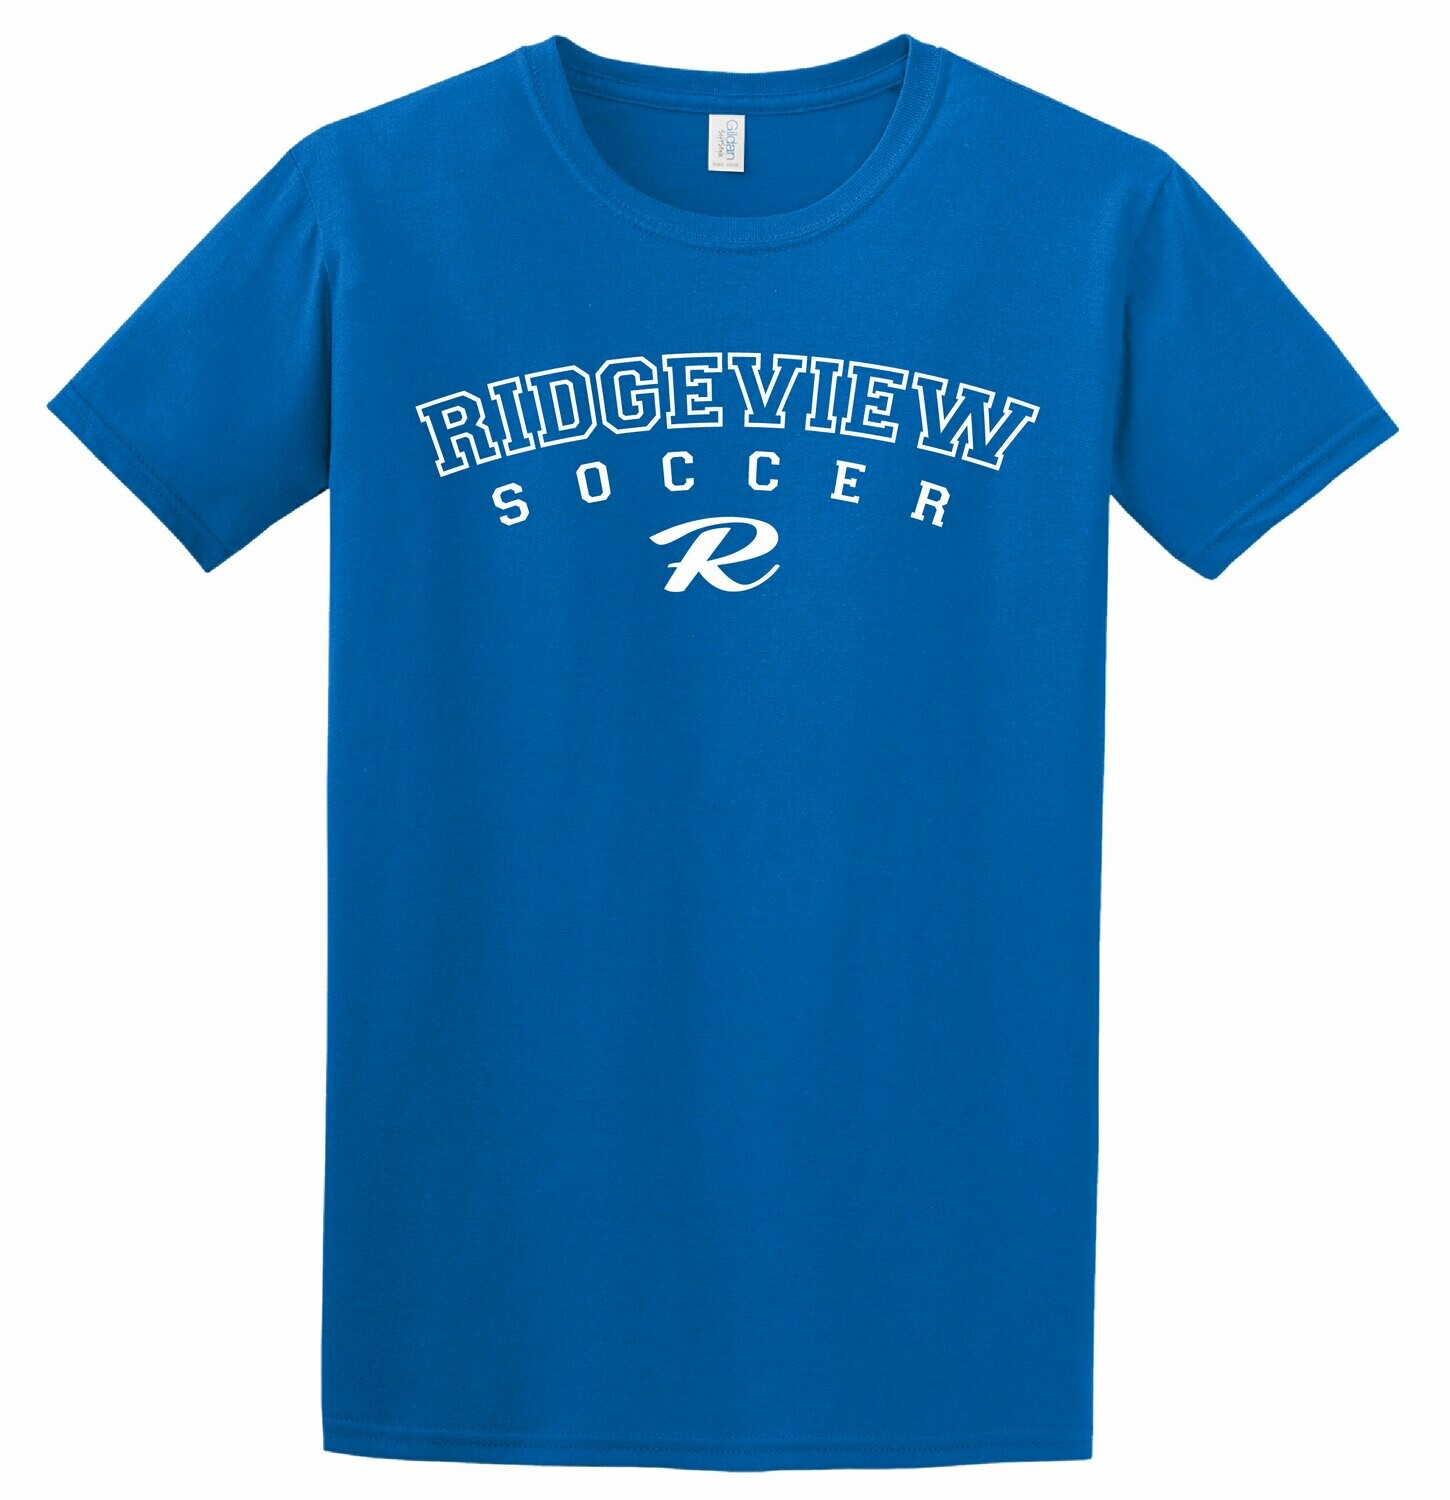 R Soccer Softstyle Tee